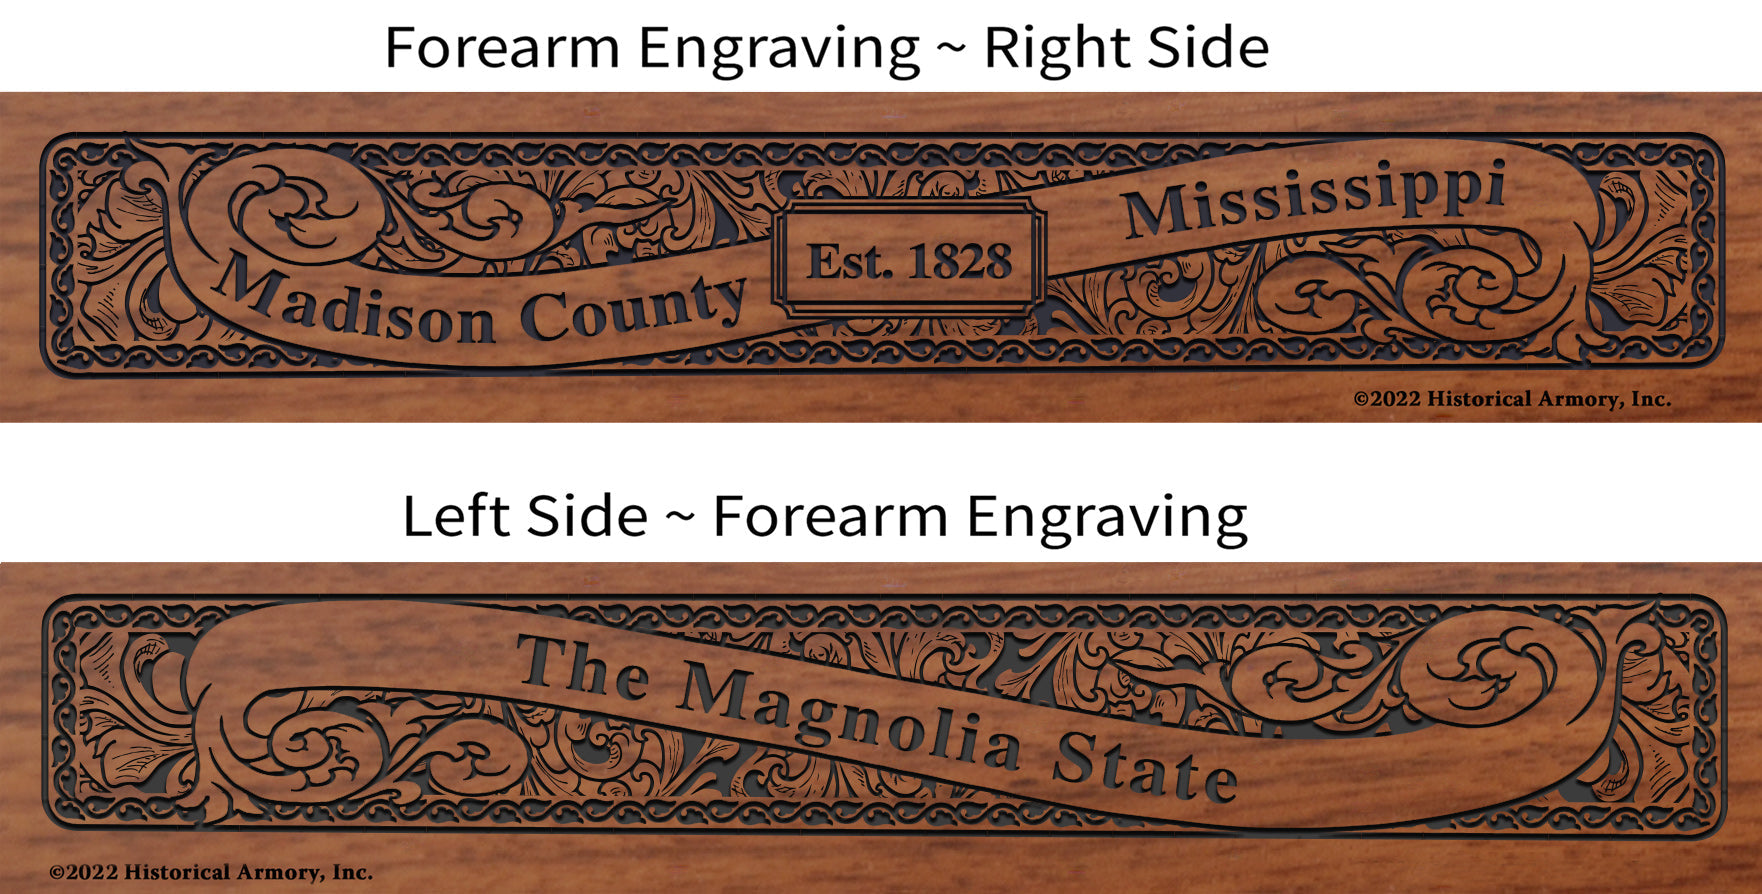 Madison County Mississippi Engraved Rifle Forearm